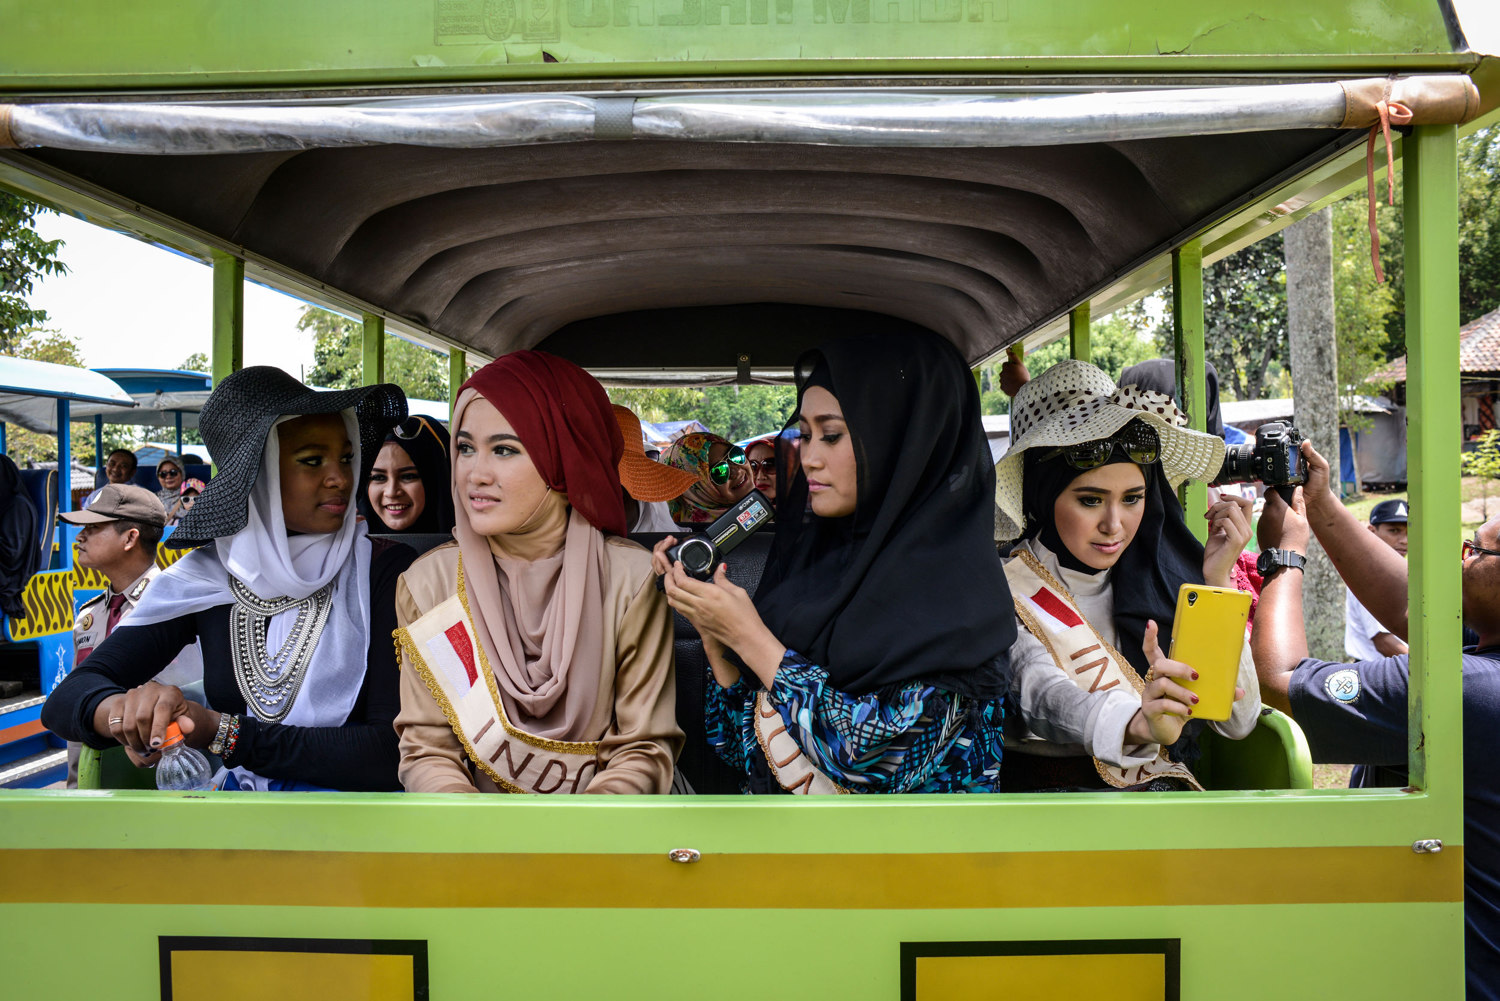  The Miss Muslimah finalists visit Borobudur,  a 9th-century Mahayana Buddhist Temple outside of Yogakarta, Indonesia. Miss Muslimah 2014 an award competition in Indonesia, which intends to be the opposite of a beauty pageant. 